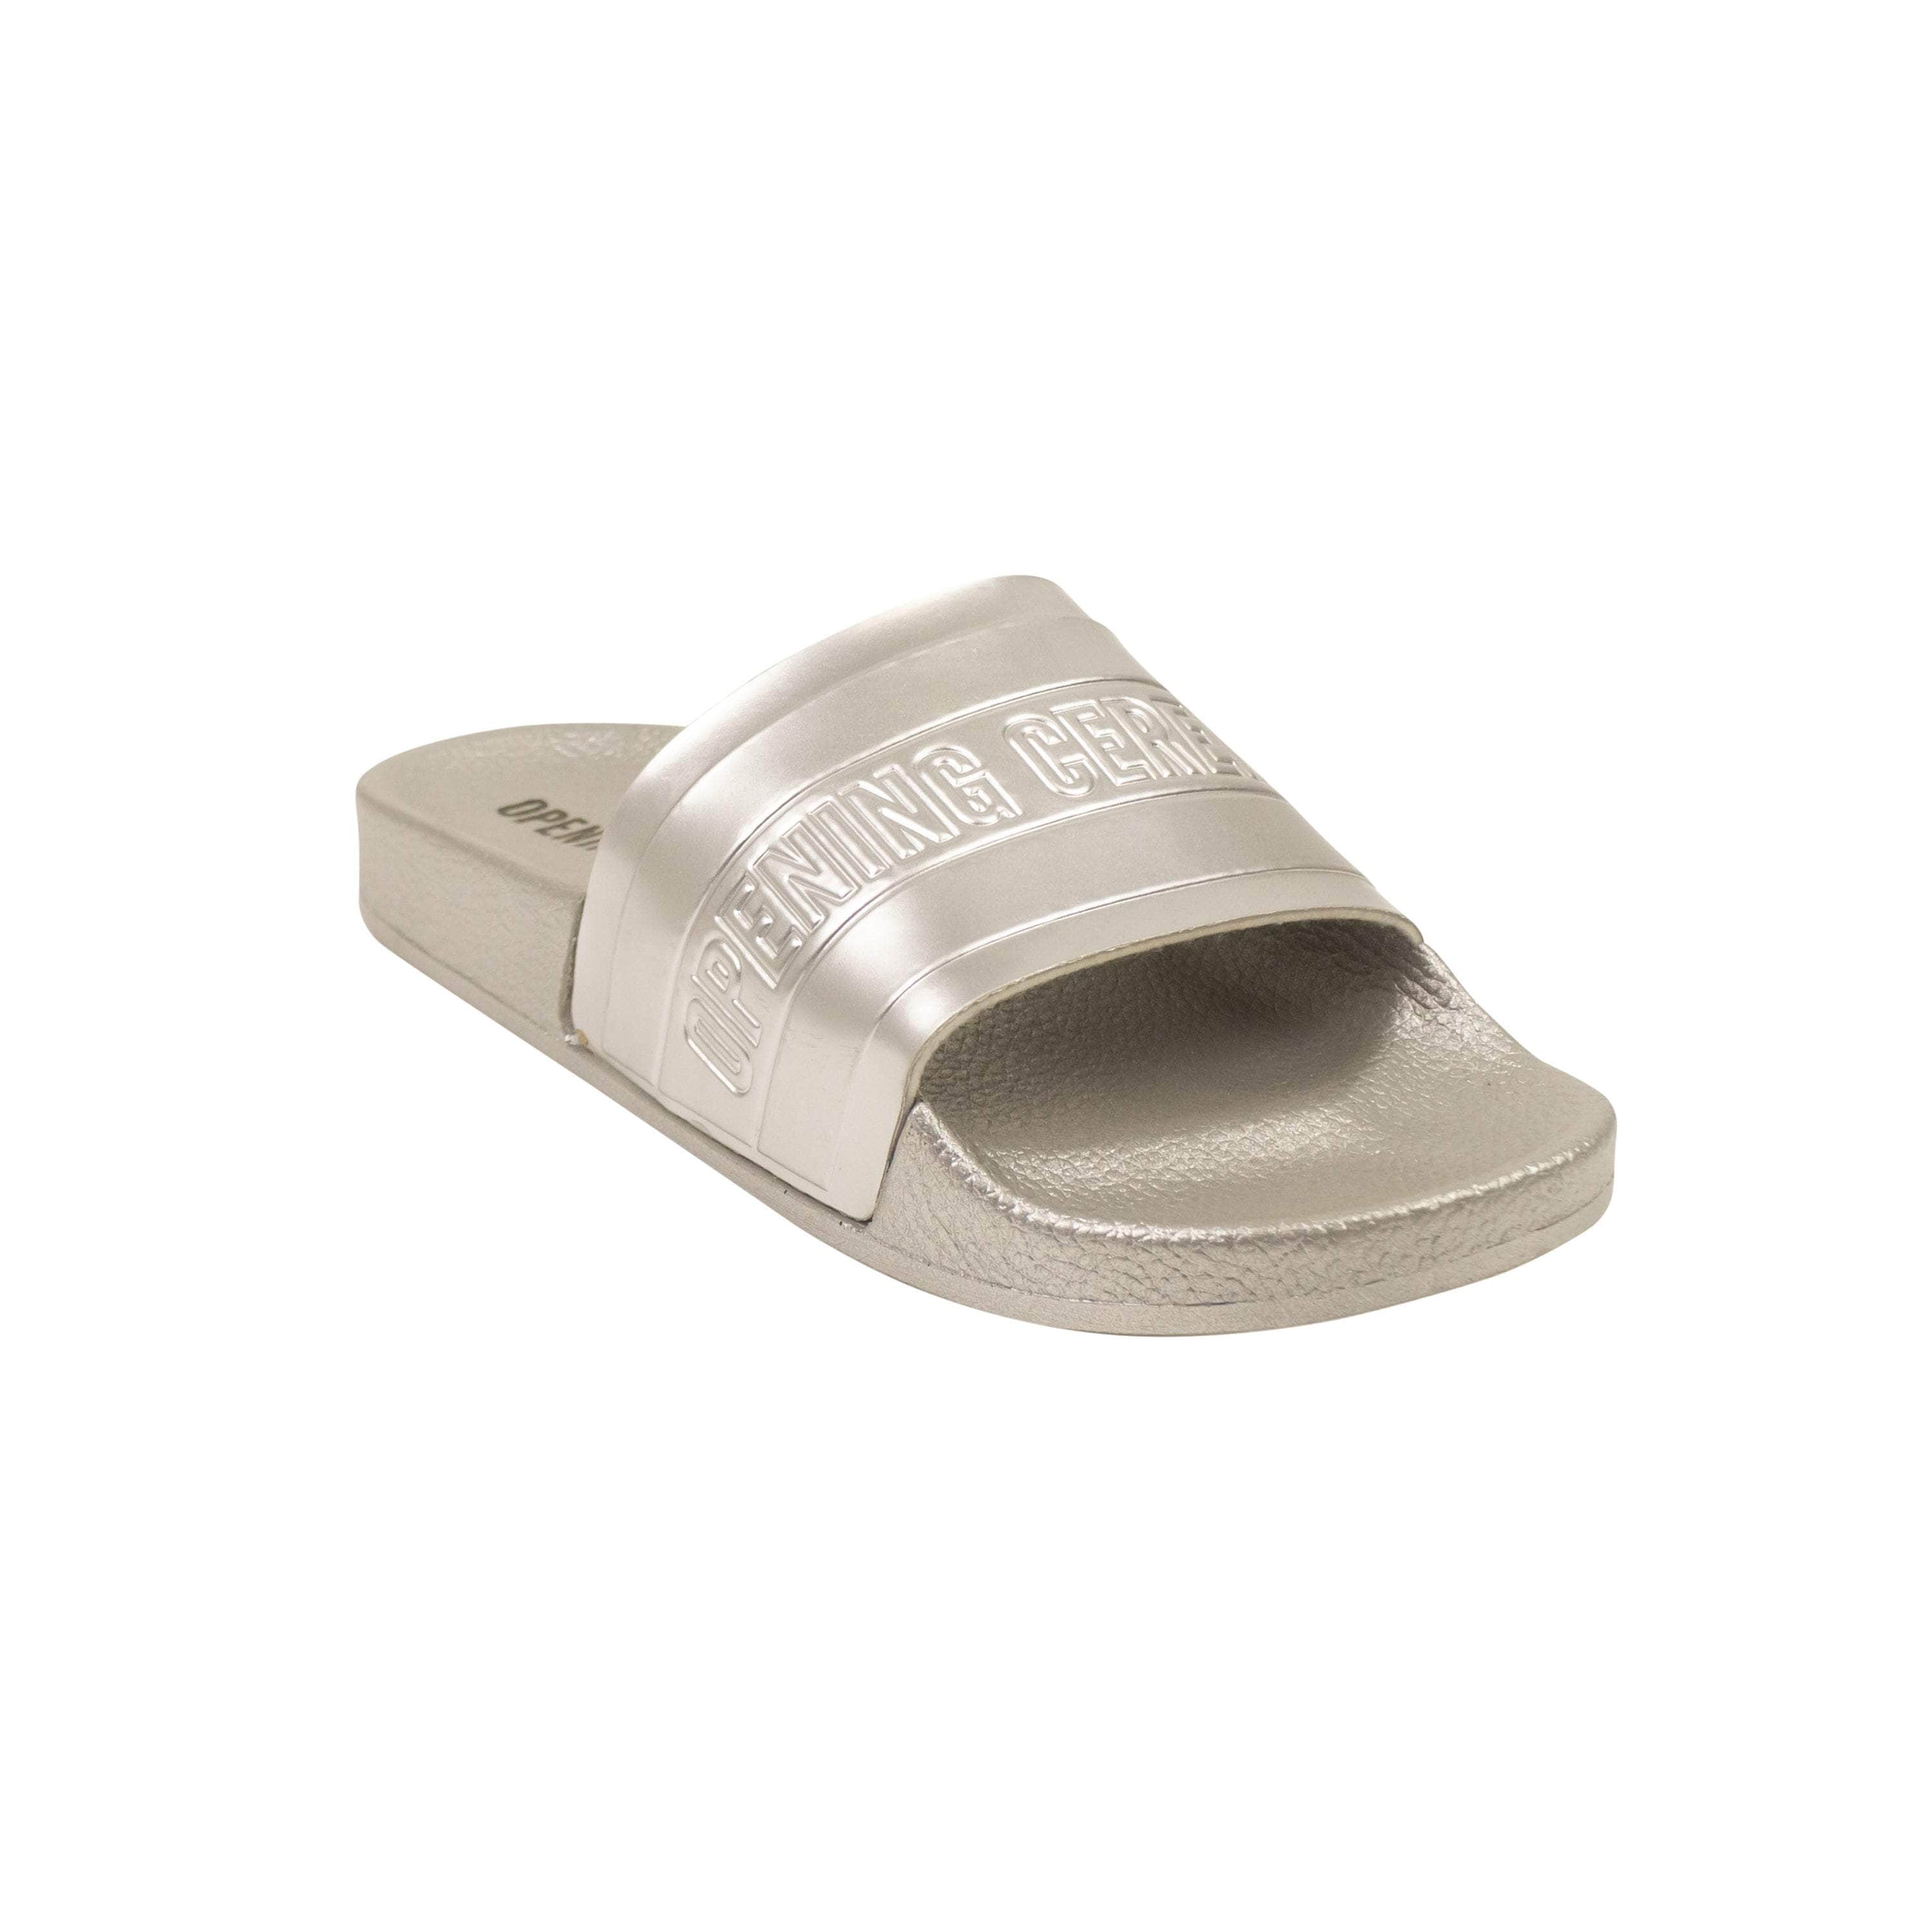 Opening Ceremony channelenable-all, chicmi, couponcollection, gender-mens, main-shoes, mens-shoes, mens-slides-slippers, opening-ceremony, size-35, under-250 Silver Rubber ACE Logo Slides